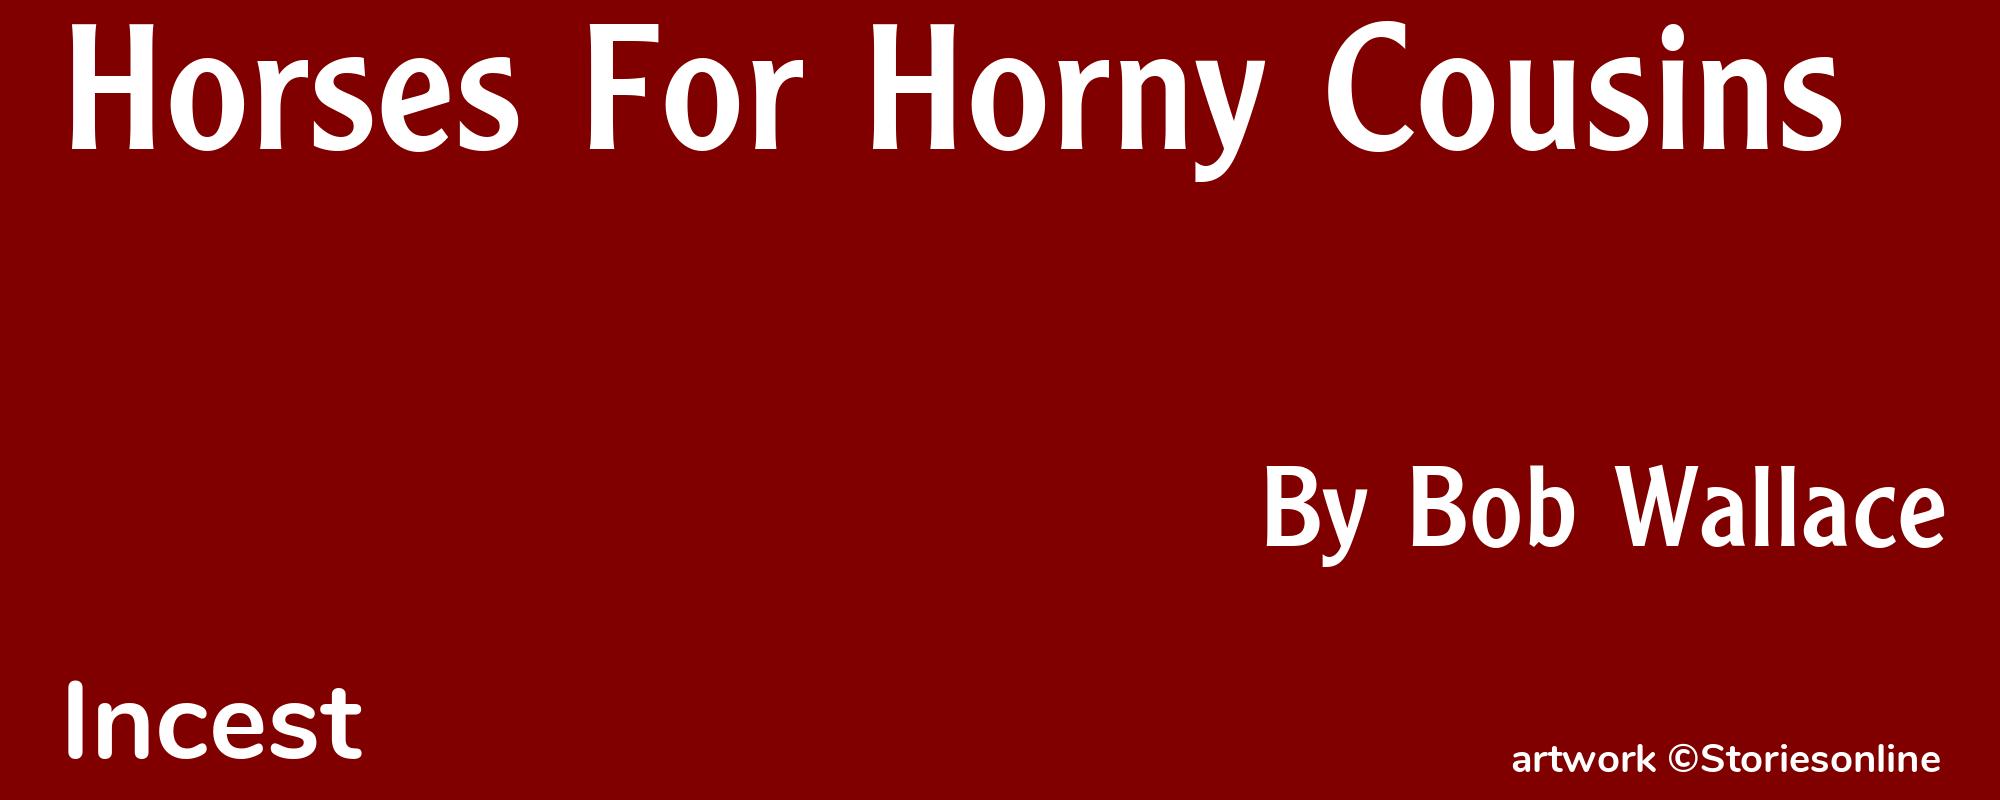 Horses For Horny Cousins - Cover